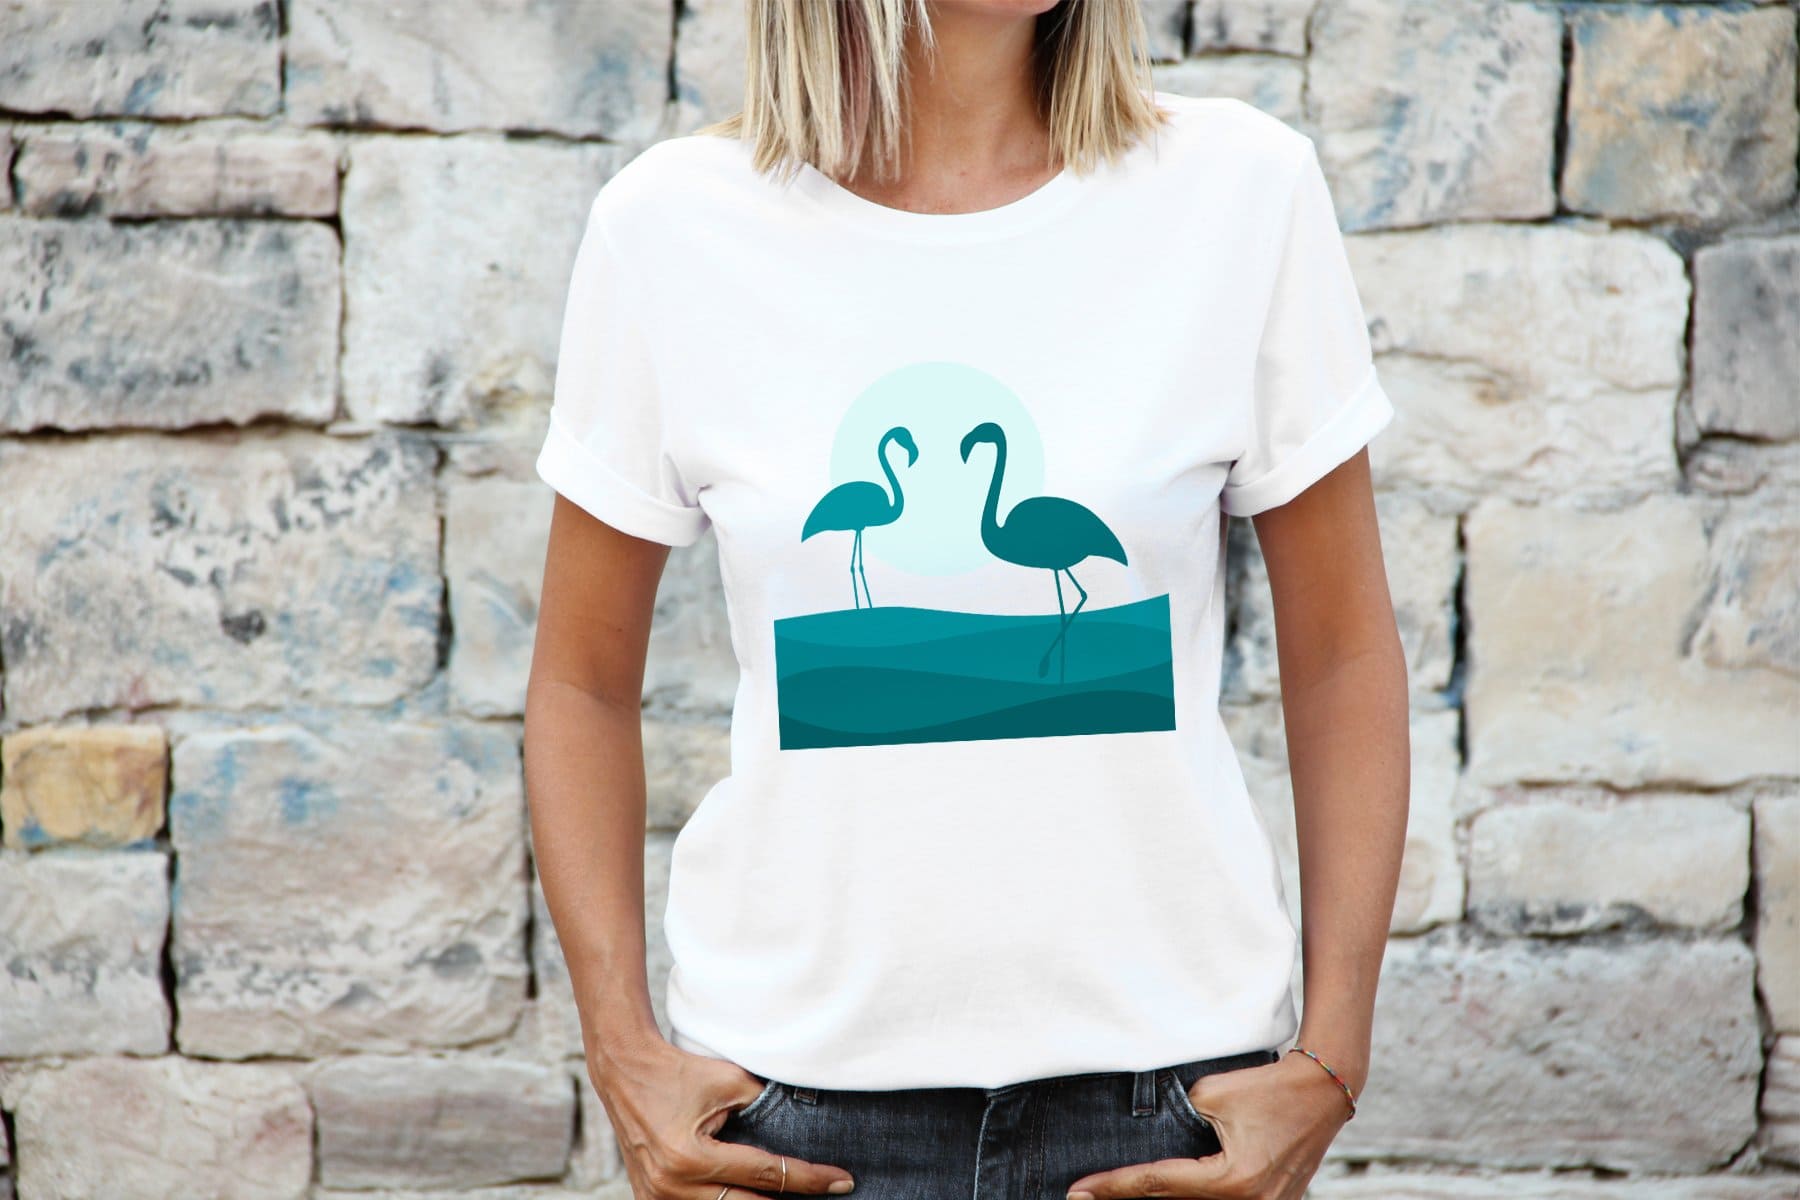 On a white women's T-shirt, romantic sea-colored flamingos are depicted.